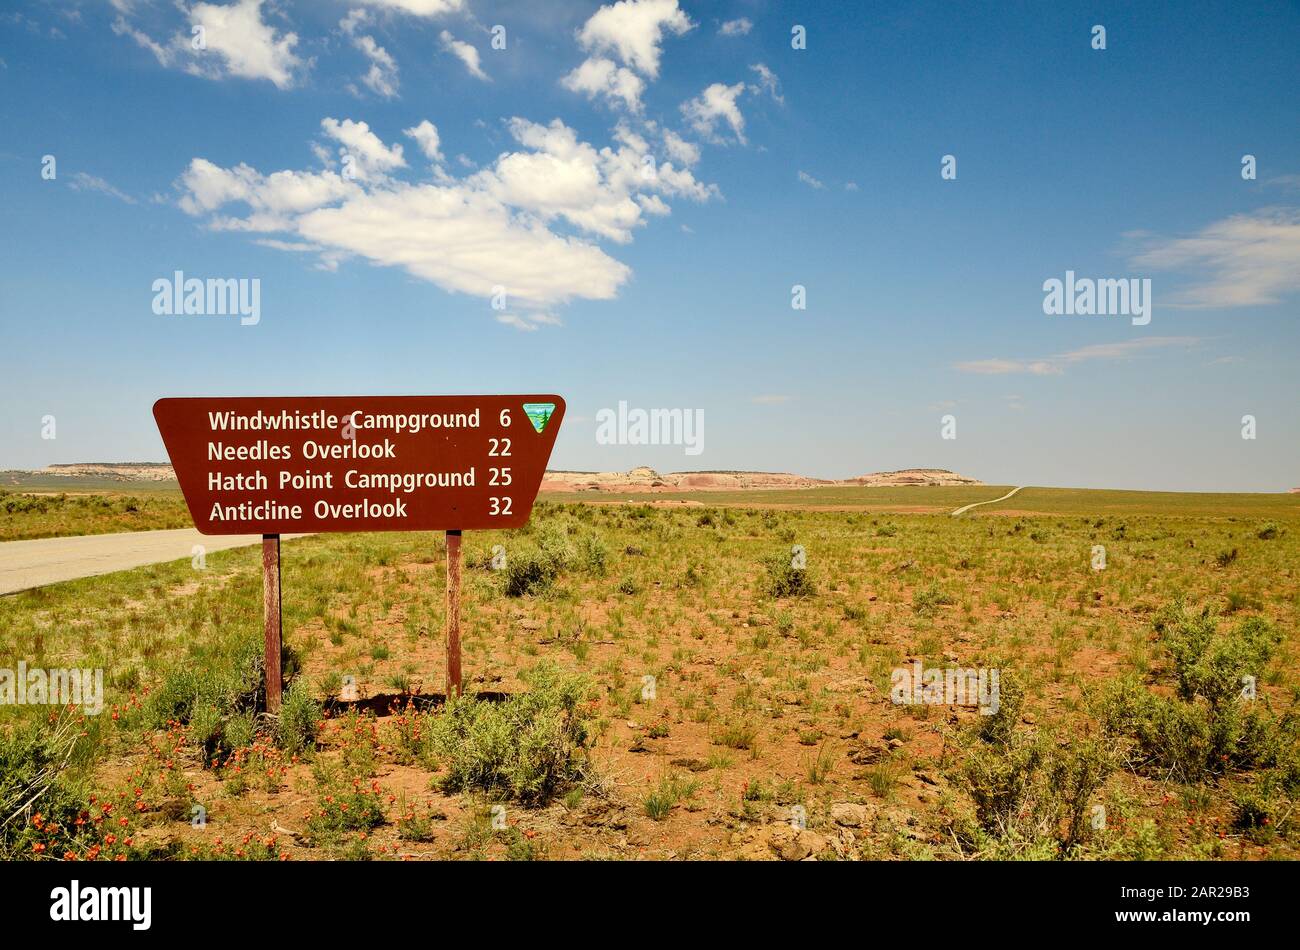 brown road sign indicating the distance to different destinations, in the background blue sky with white clouds. Stock Photo